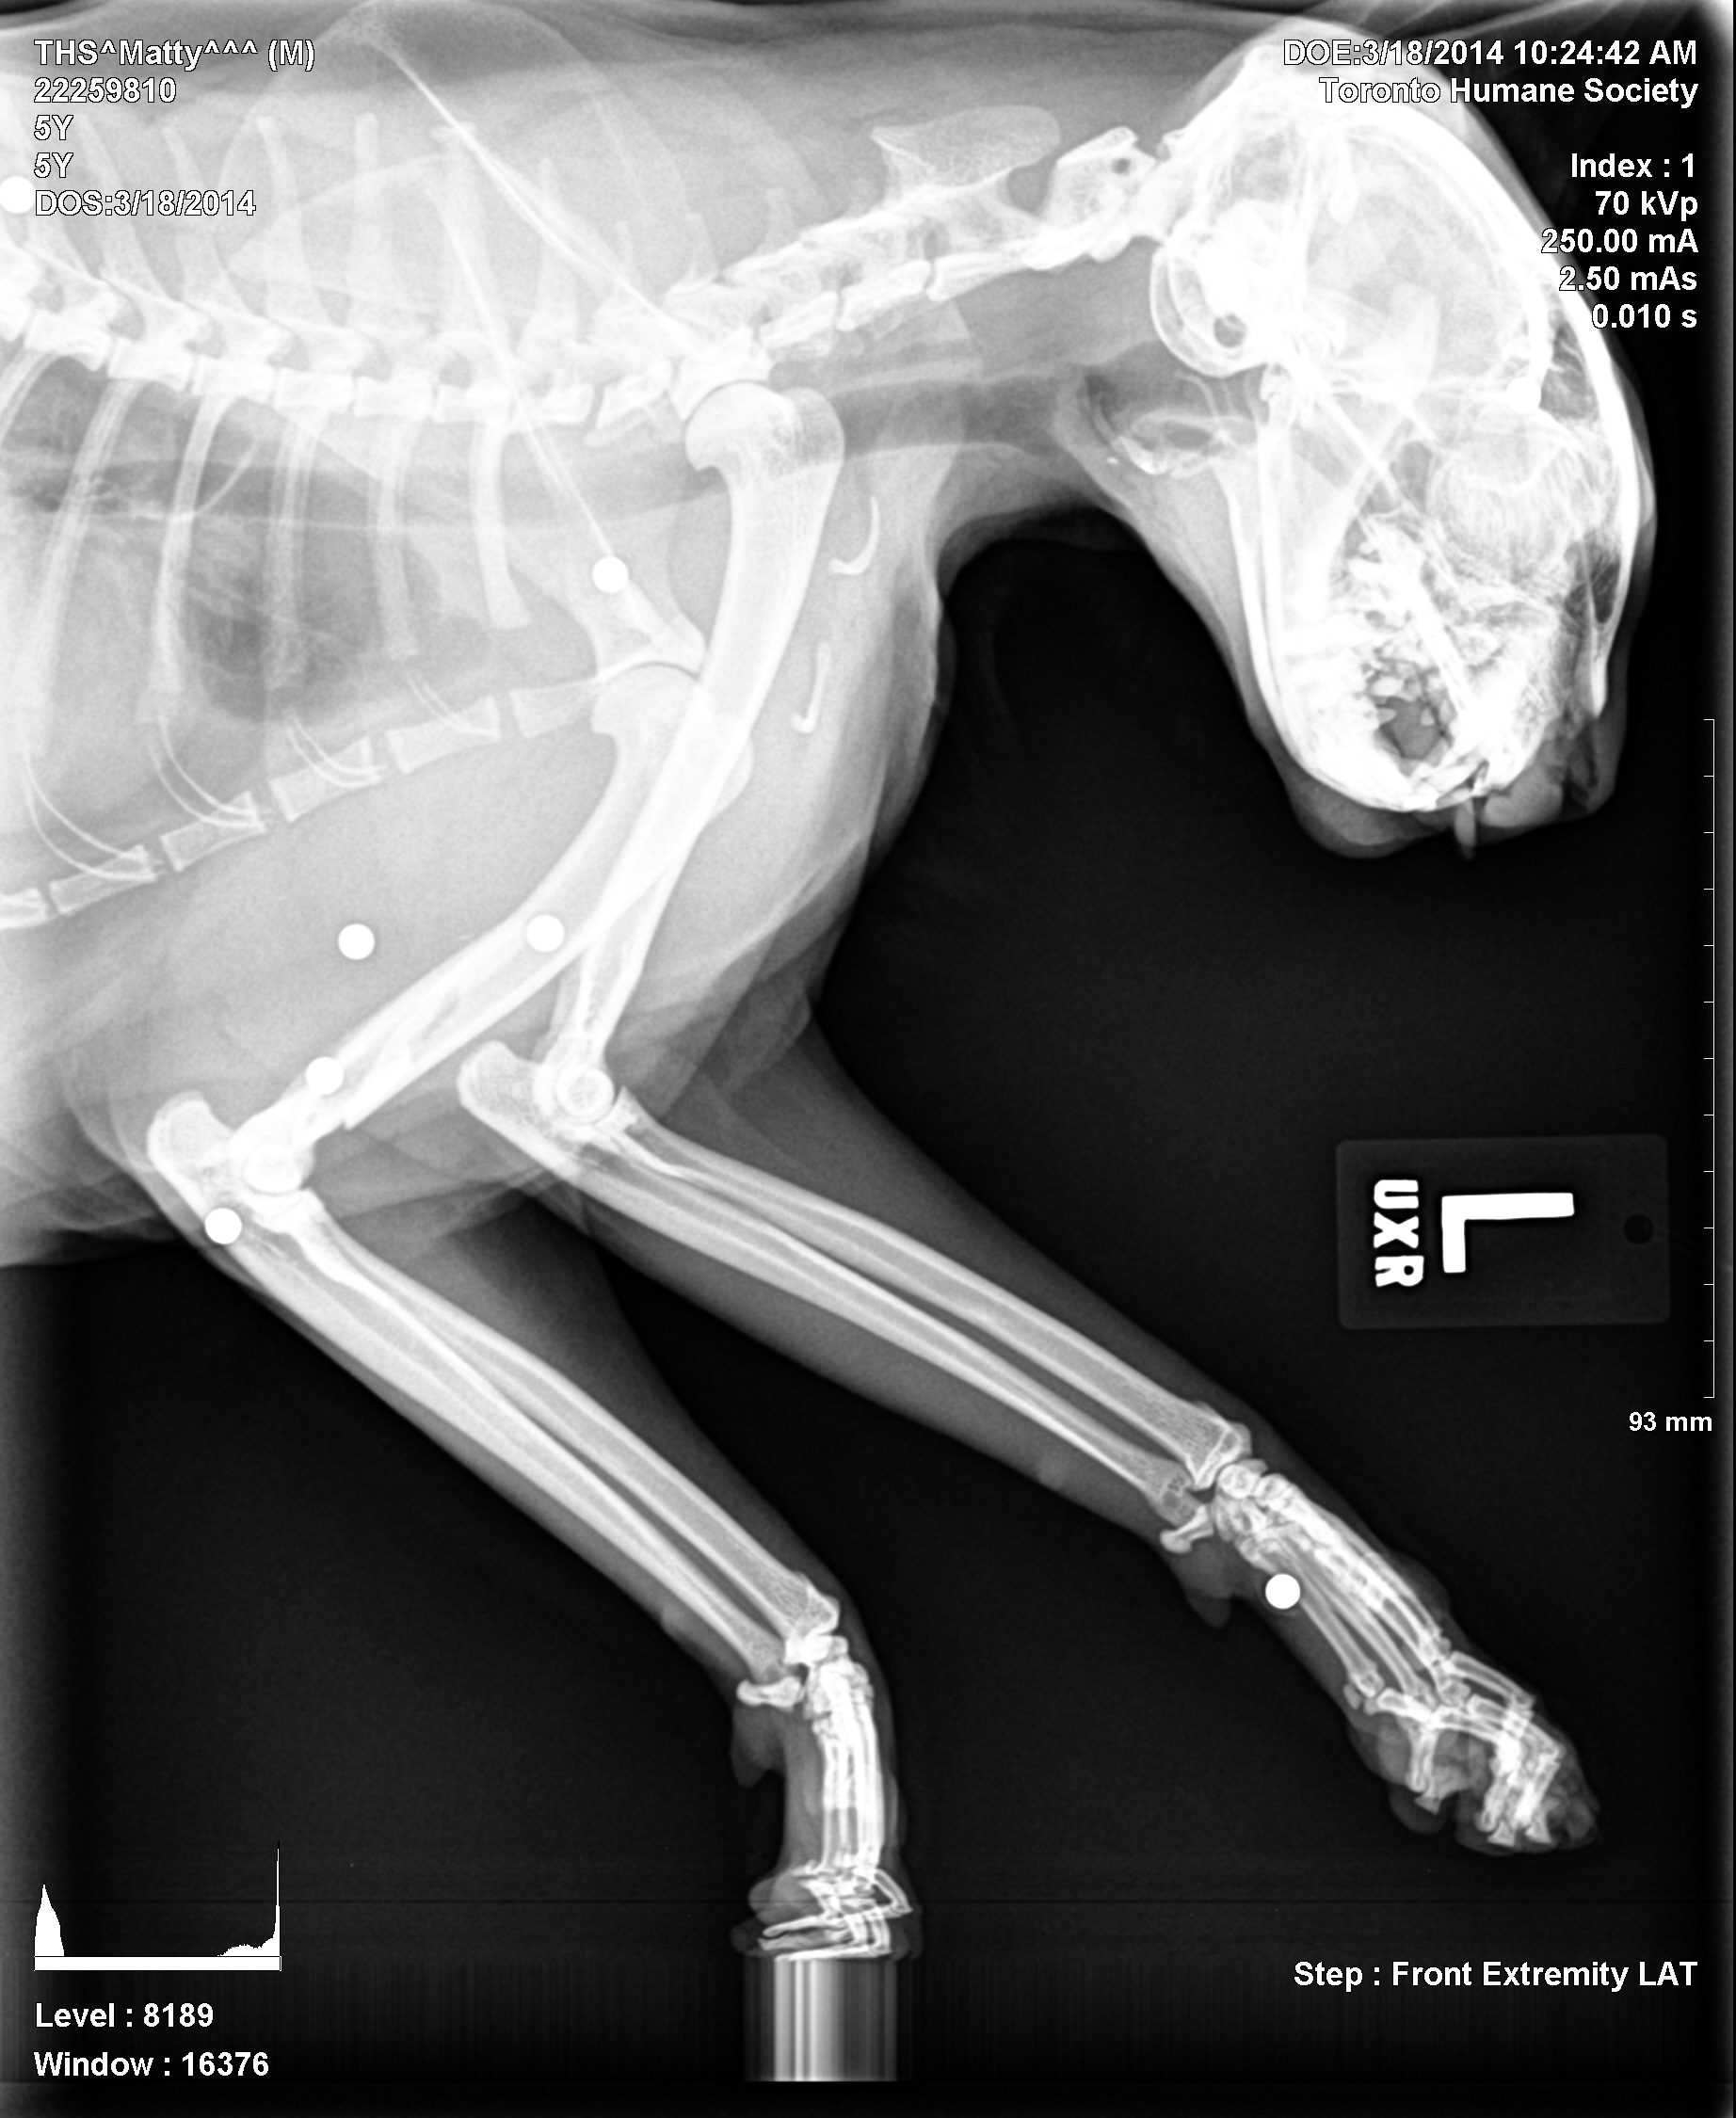 Deliberate act of animal cruelty. Cat found with 16 pellet shots throughout his body.